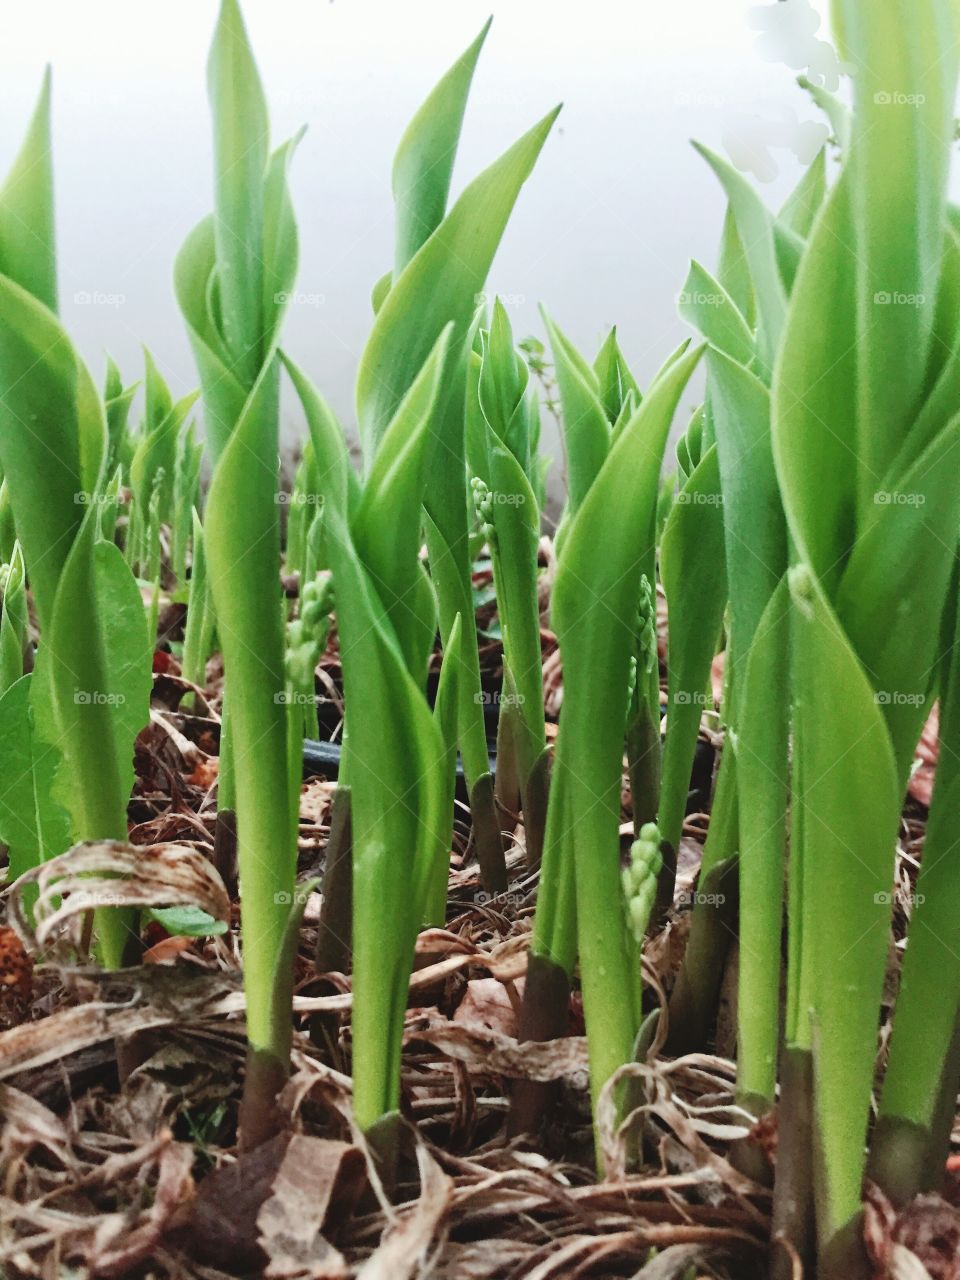 Lily of the valley shoots in spring 